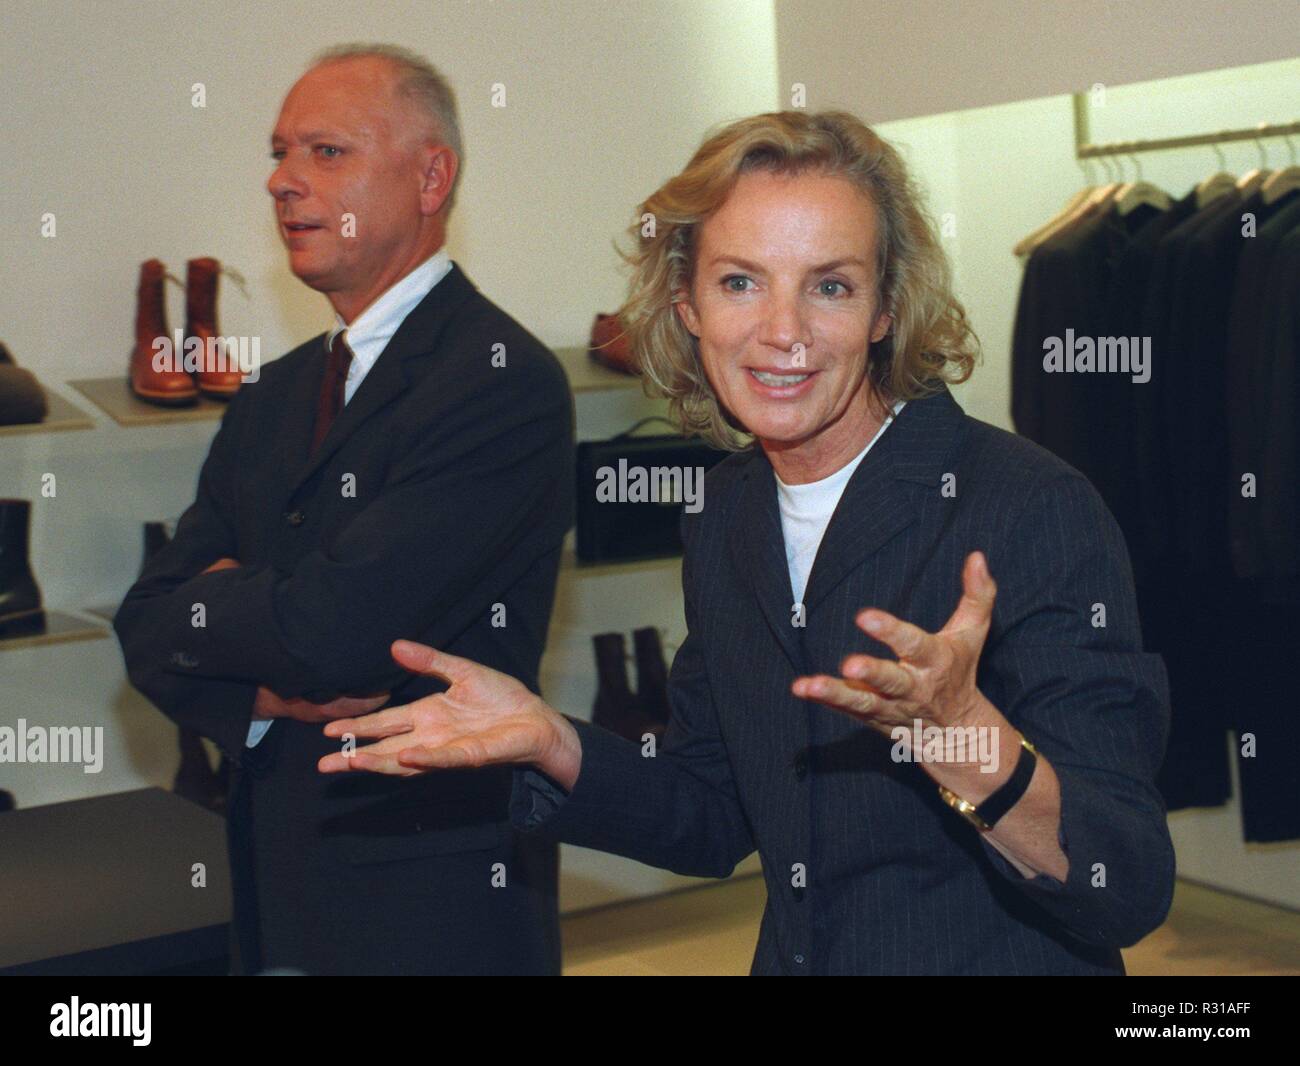 dpa files) - The German fashion designer Jil Sander and the head of the her  company Jil Sander AG, Roland Boehler (L), pictured at the opening of a new  flagship store in